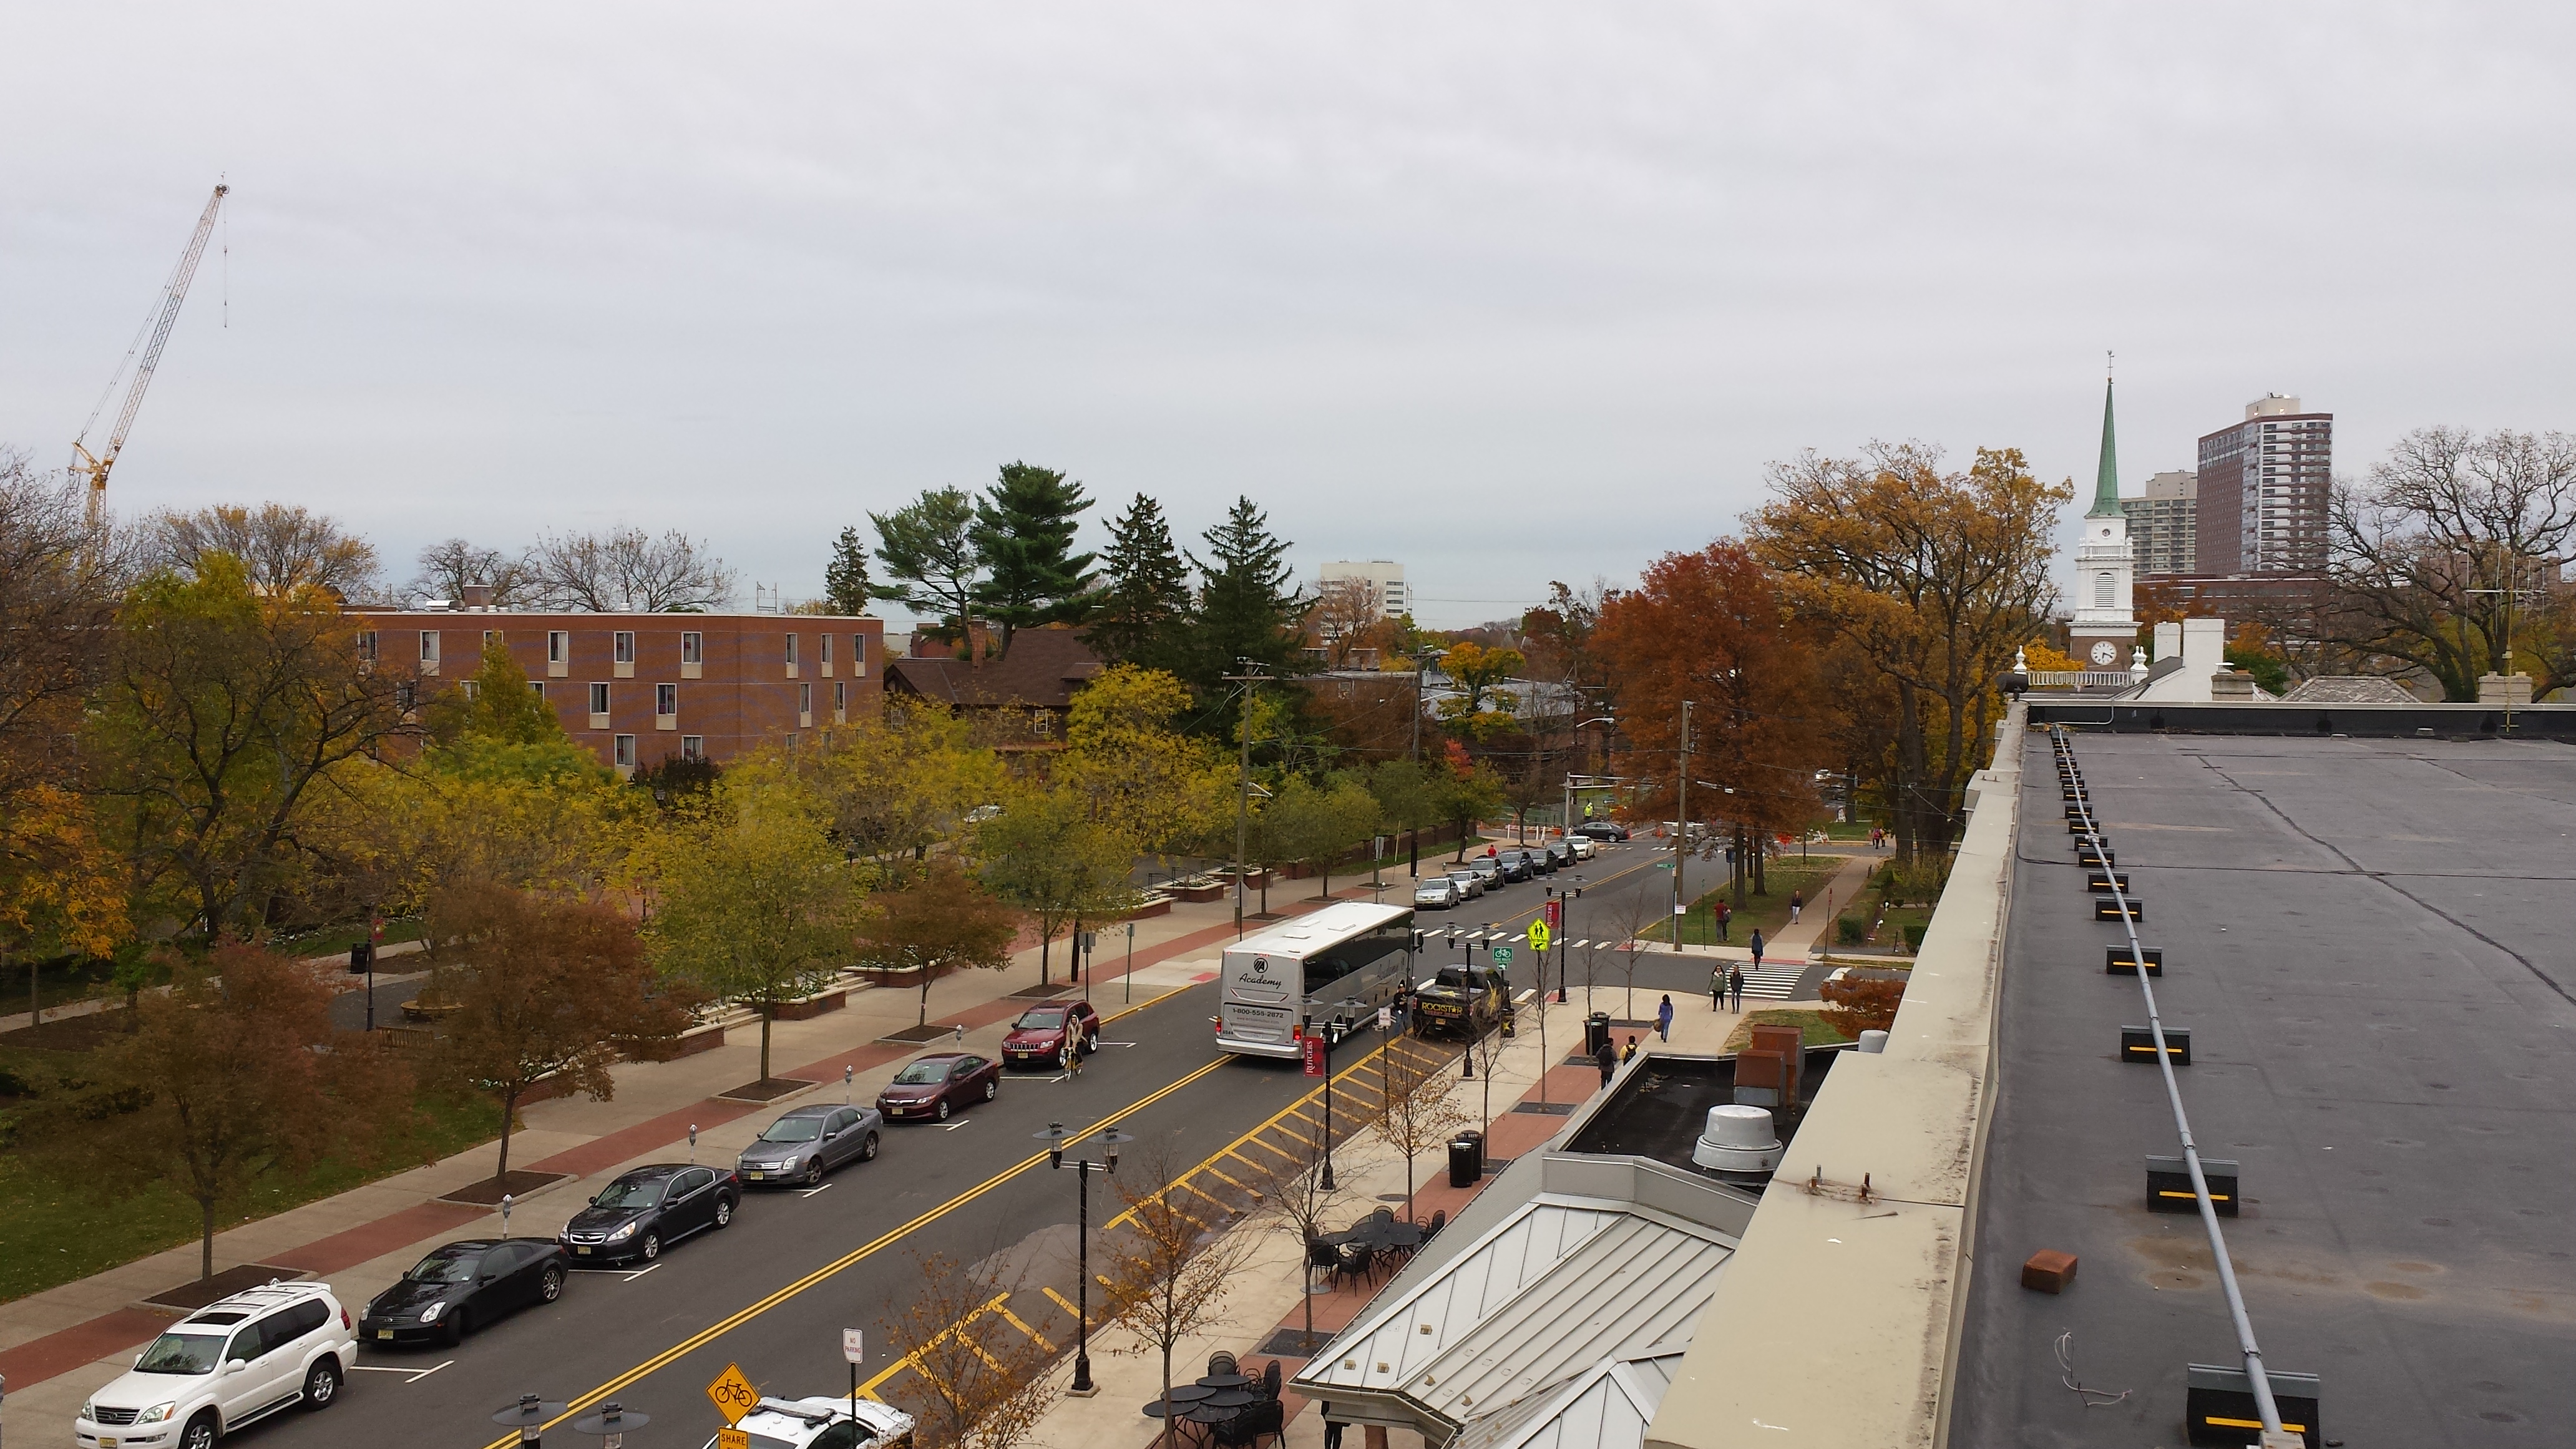 A View from the Roof Of the Student Center